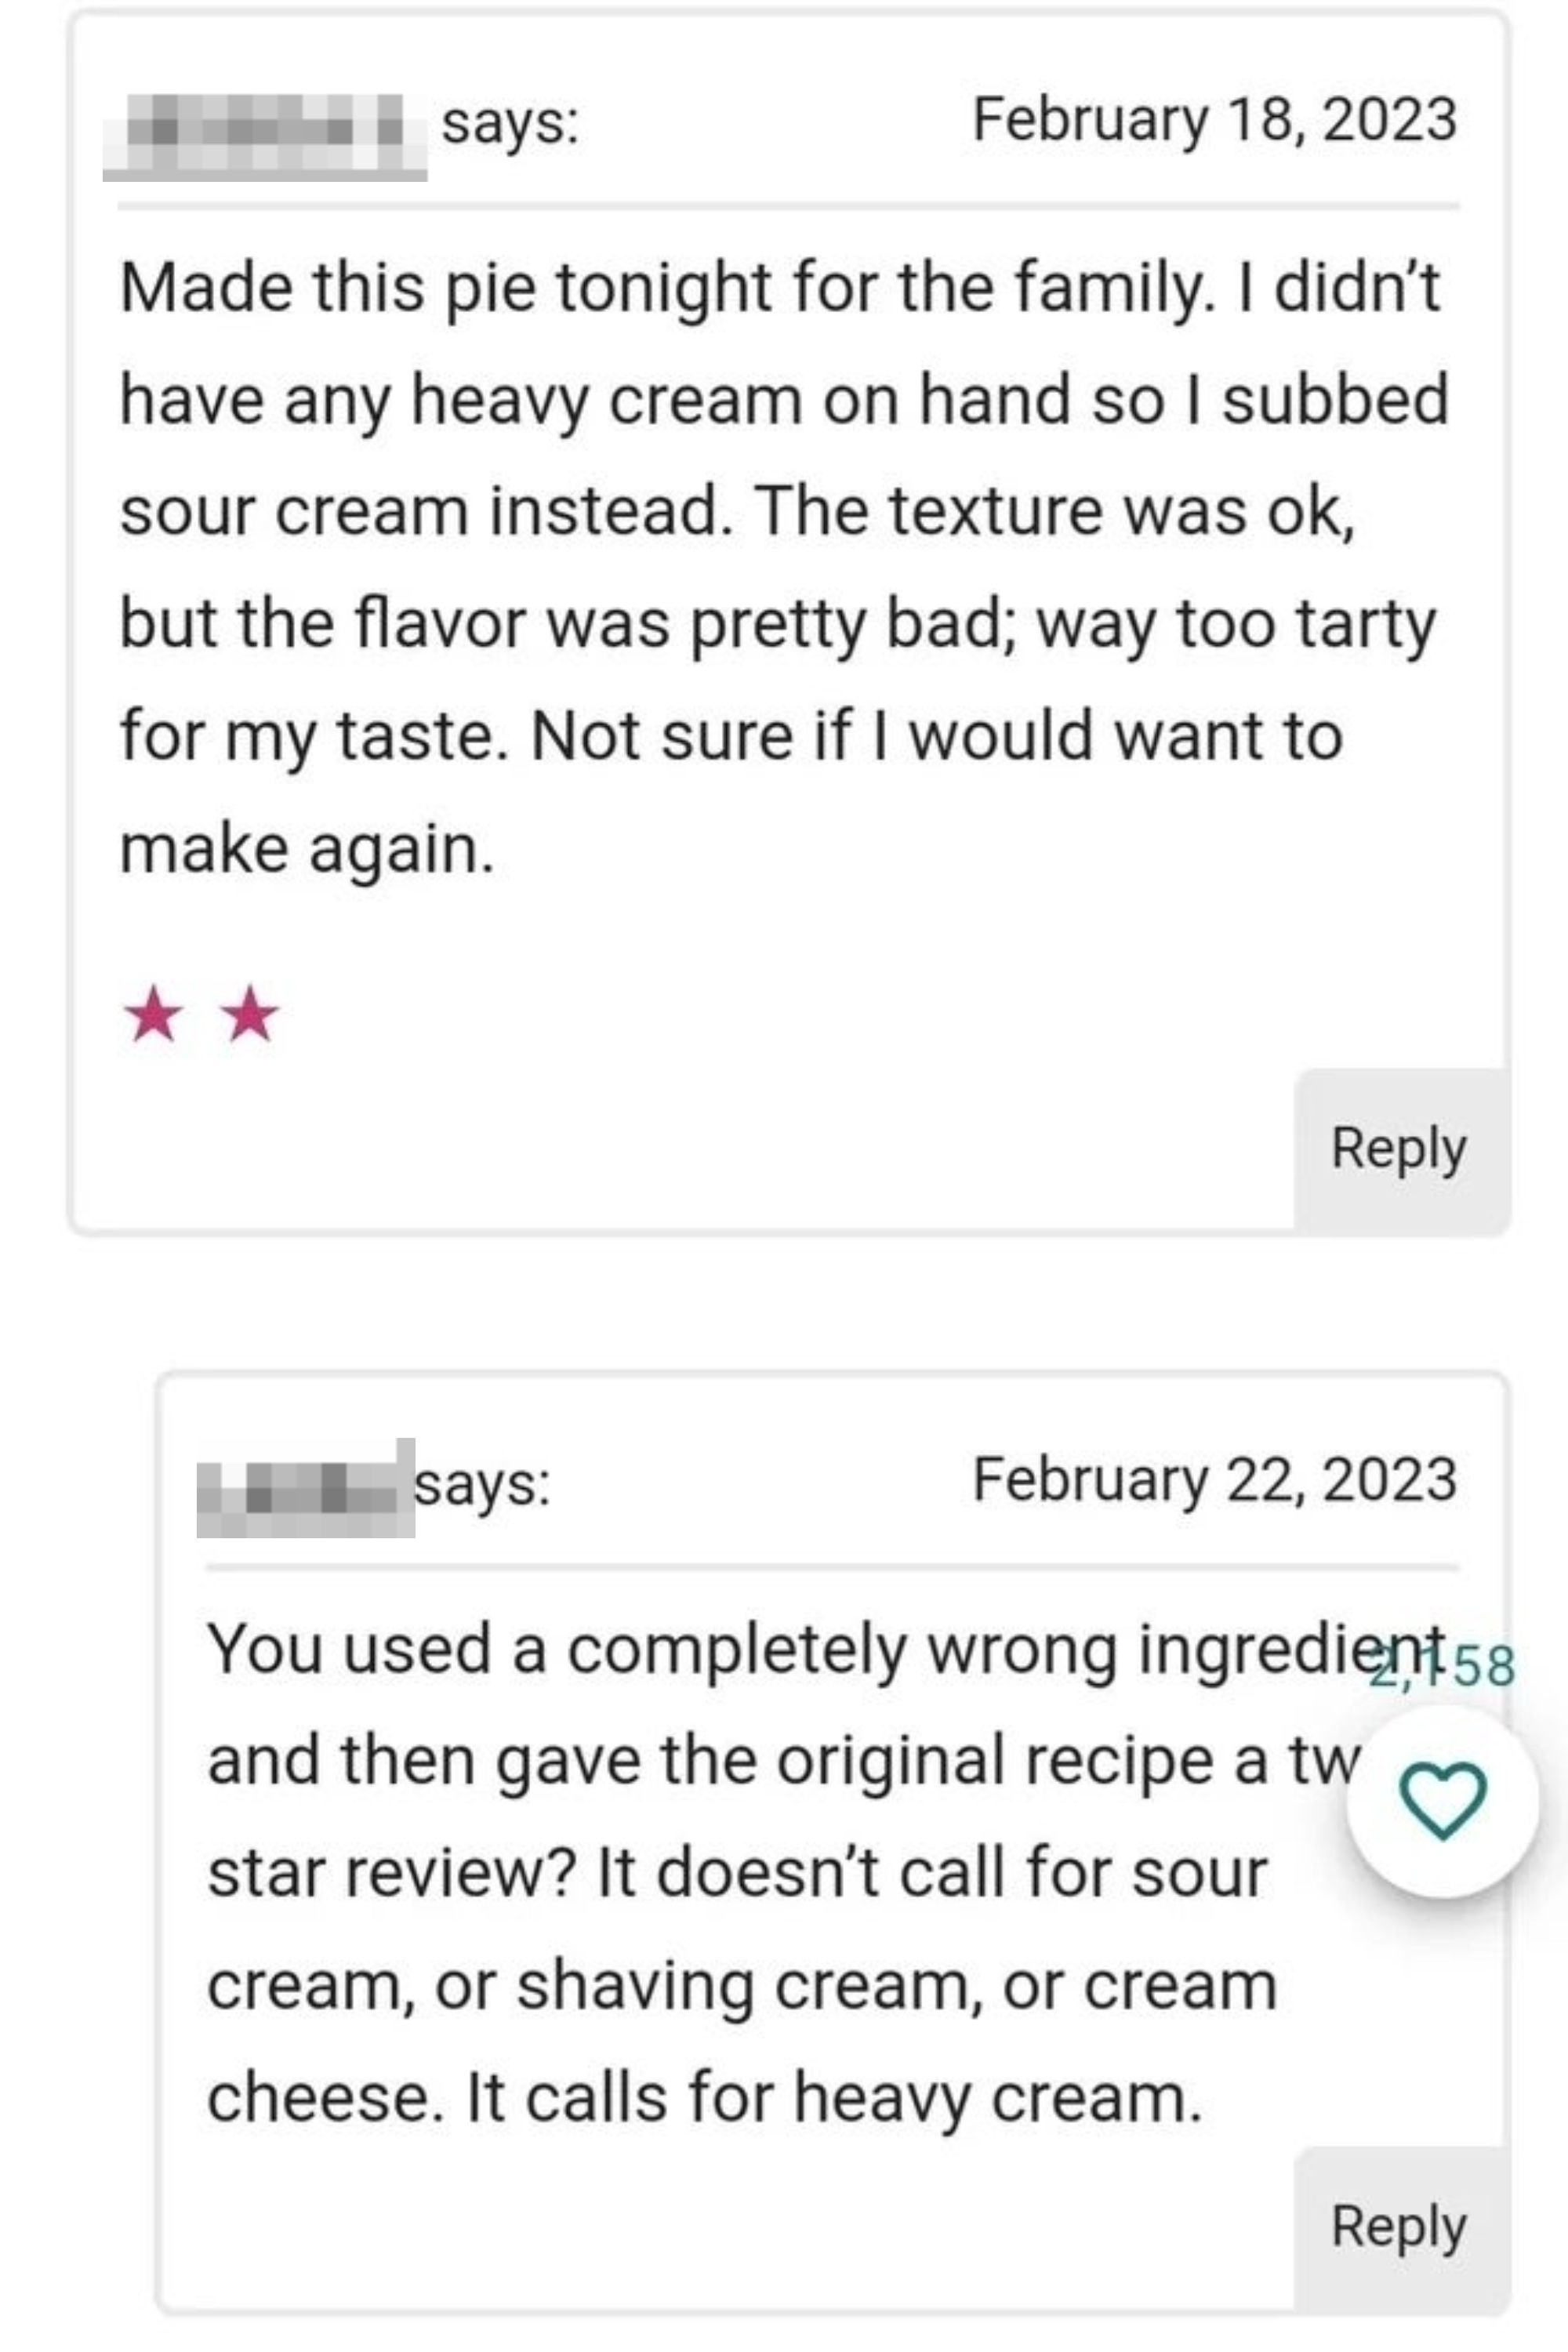 A 2-star recipe review for a pie where the review mentions they used sour cream instead of heavy cream and complained about the flavor